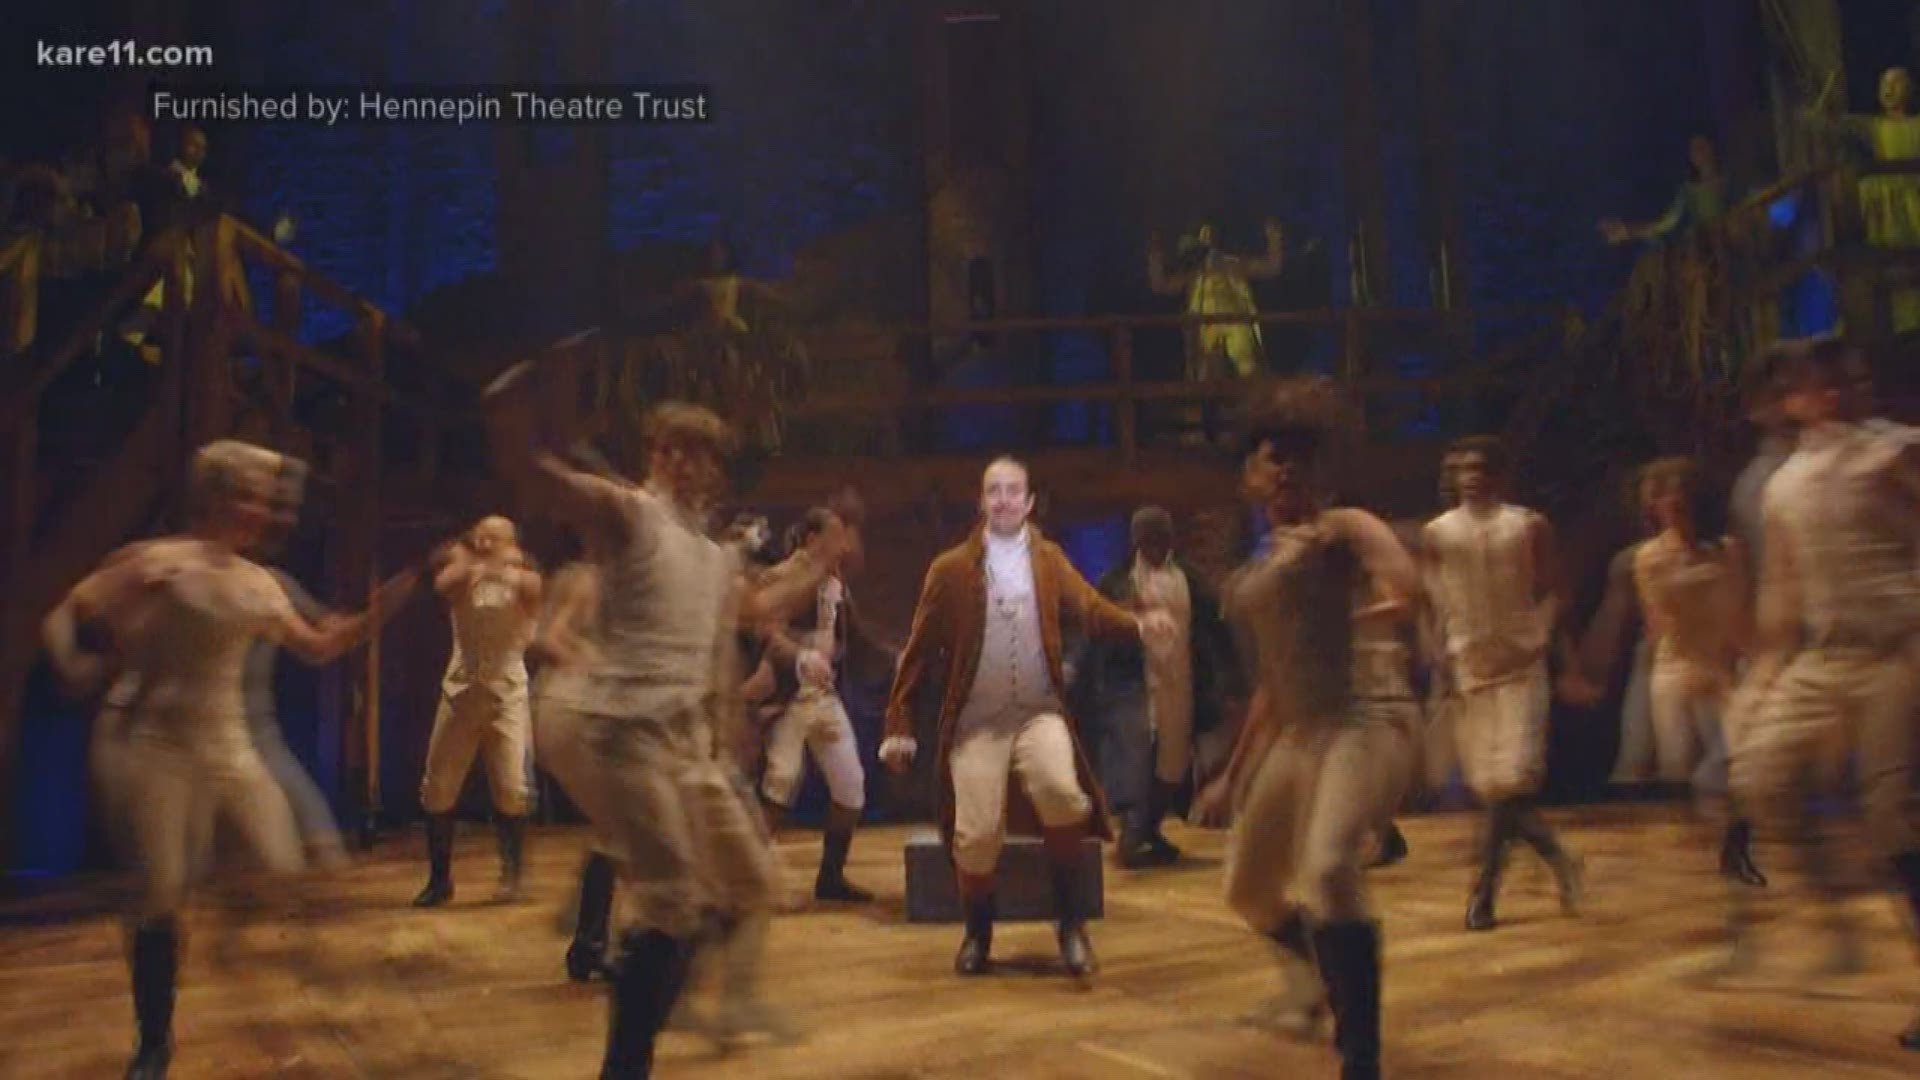 We've talked about it for months and it's finally here! Hamilton opens Wednesday in Minneapolis and KARE 11's Ellery McCardle has all the details: https://kare11.tv/2MXQhei